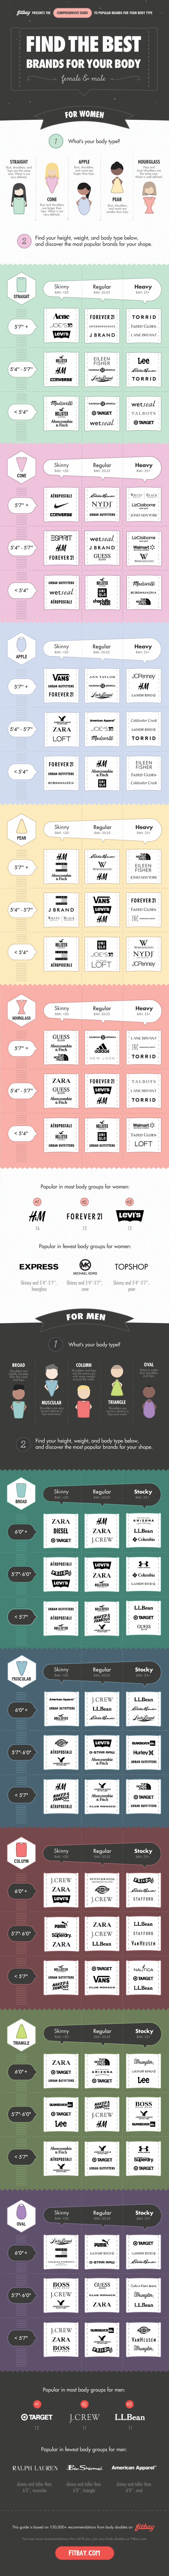 The Best Clothing Brands for Your Body Type